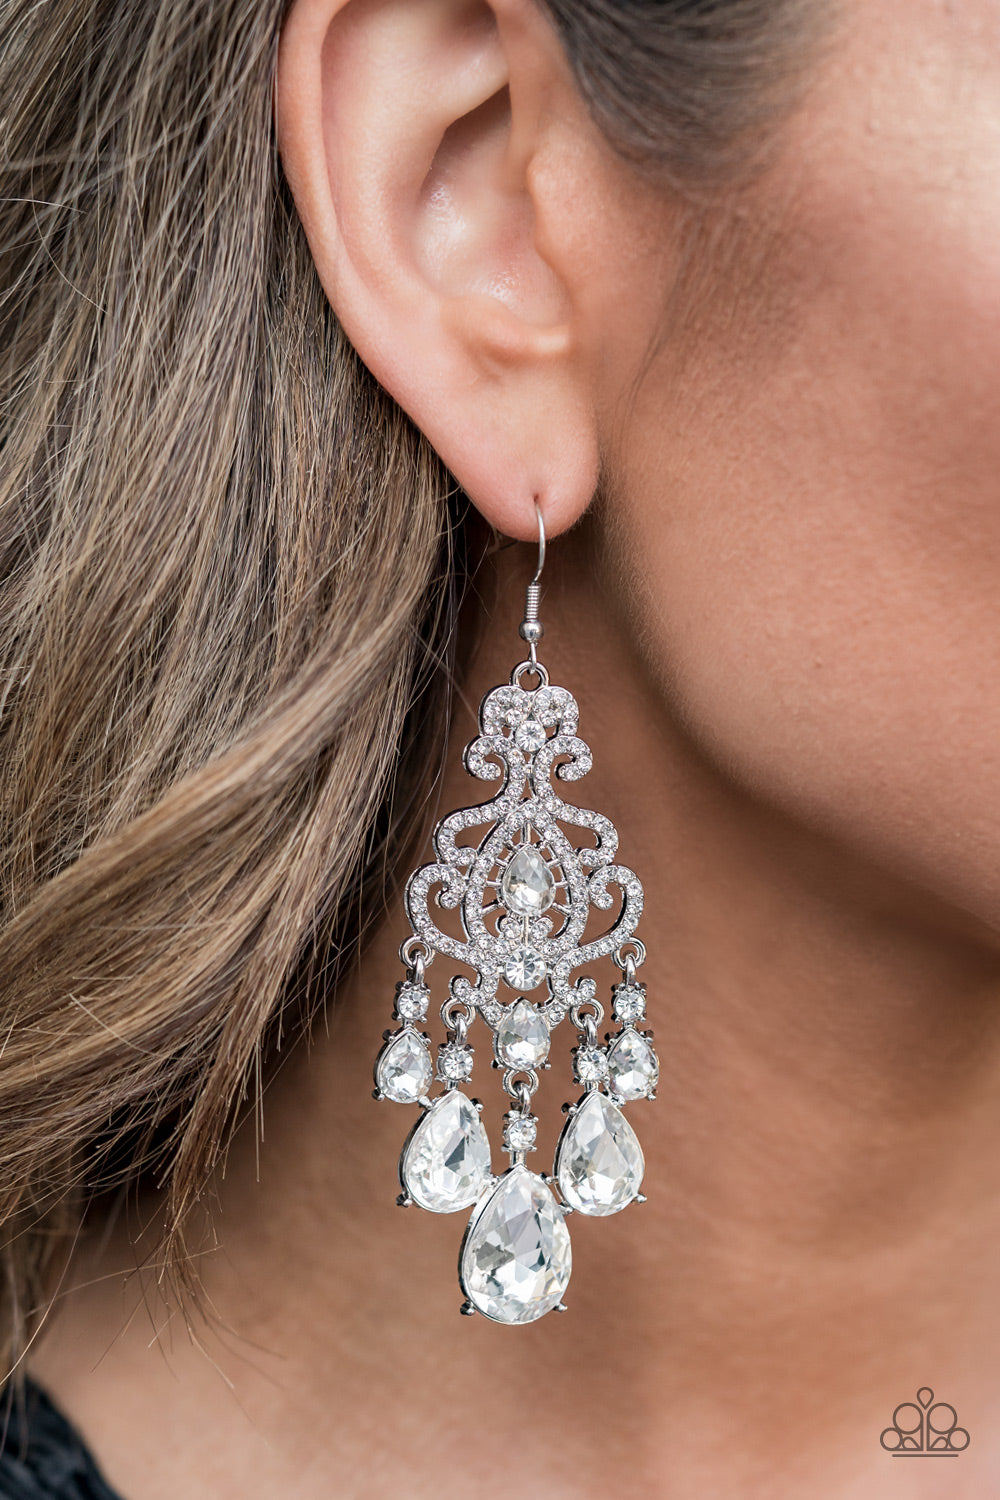 Paparazzi Accessories Queen of All Things Sparkly - White Earrings gradually increasing in size, glassy white teardrop gems create a dramatic fringe at the bottom of a decorative silver frame swirling with dainty white rhinestones for a timelessly over-the-top sparkle. Earring attaches to a standard fishhook fitting.  Sold as one pair of earrings.